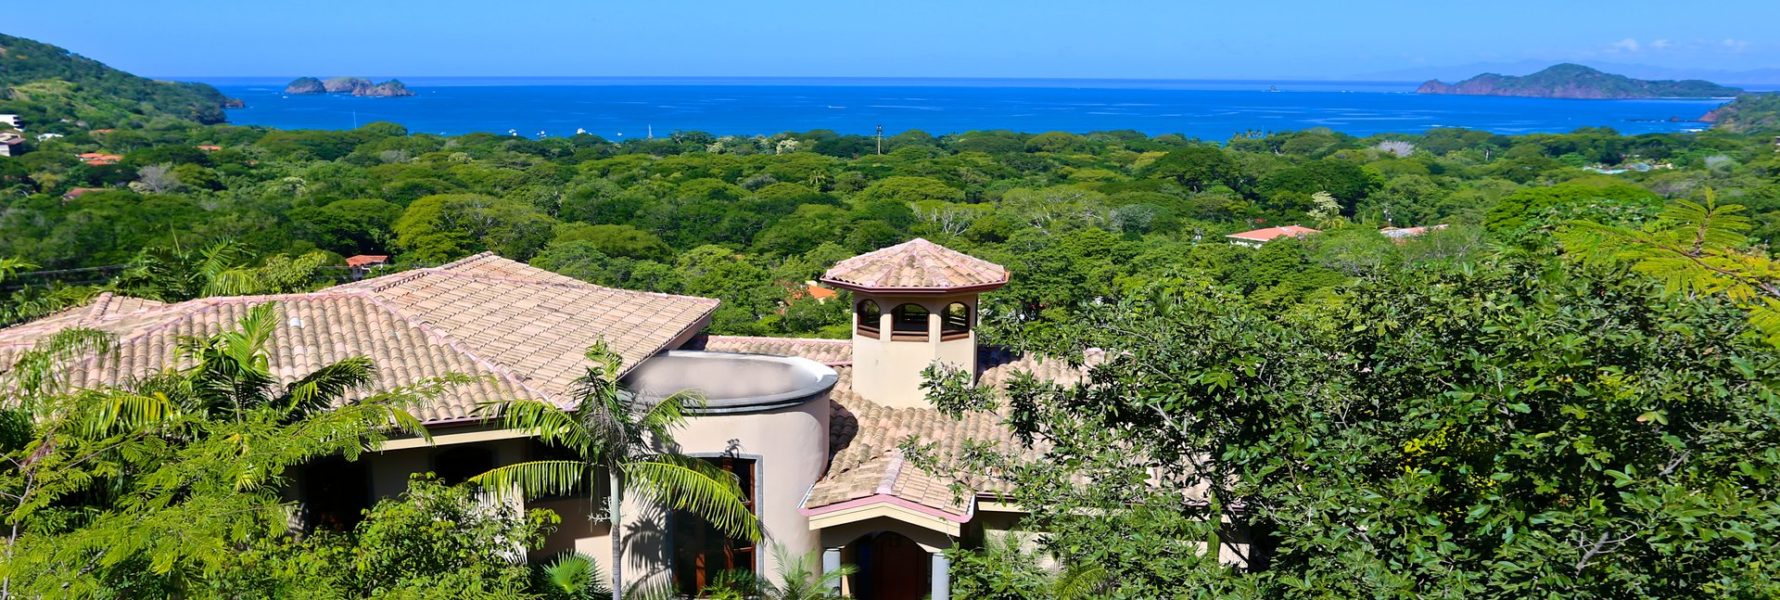 Take a peaceful walk along the grounds. Welcome home! Now all you have to do is RELAX! The grounds are fit for king an area as any to begin finish out your day with beautiful views at papagayo. 